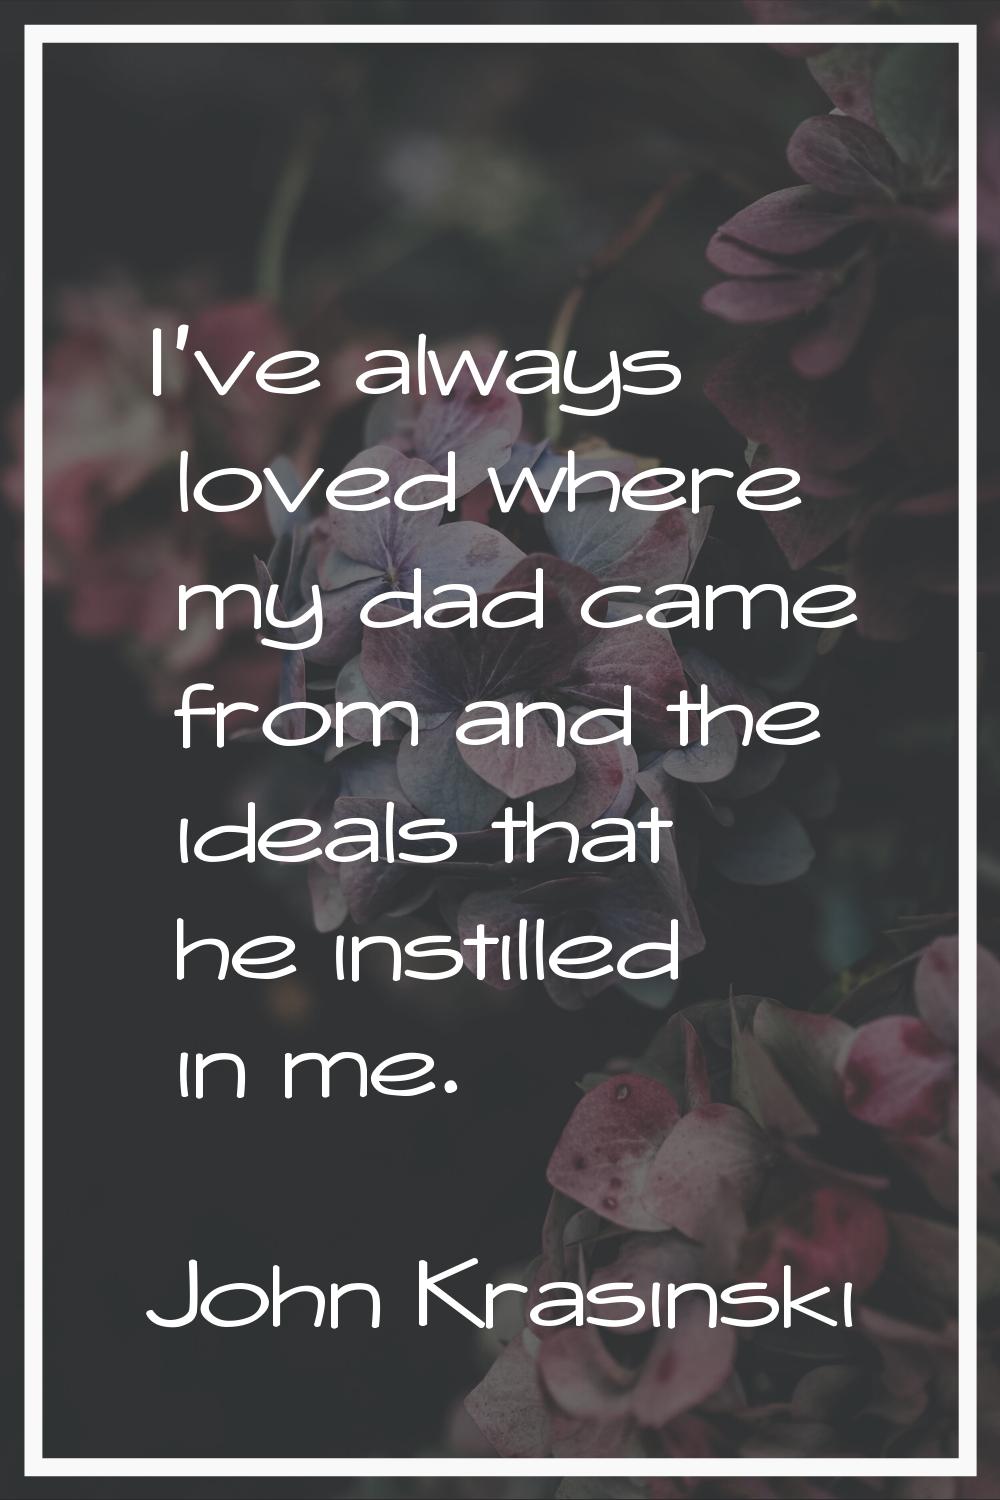 I've always loved where my dad came from and the ideals that he instilled in me.